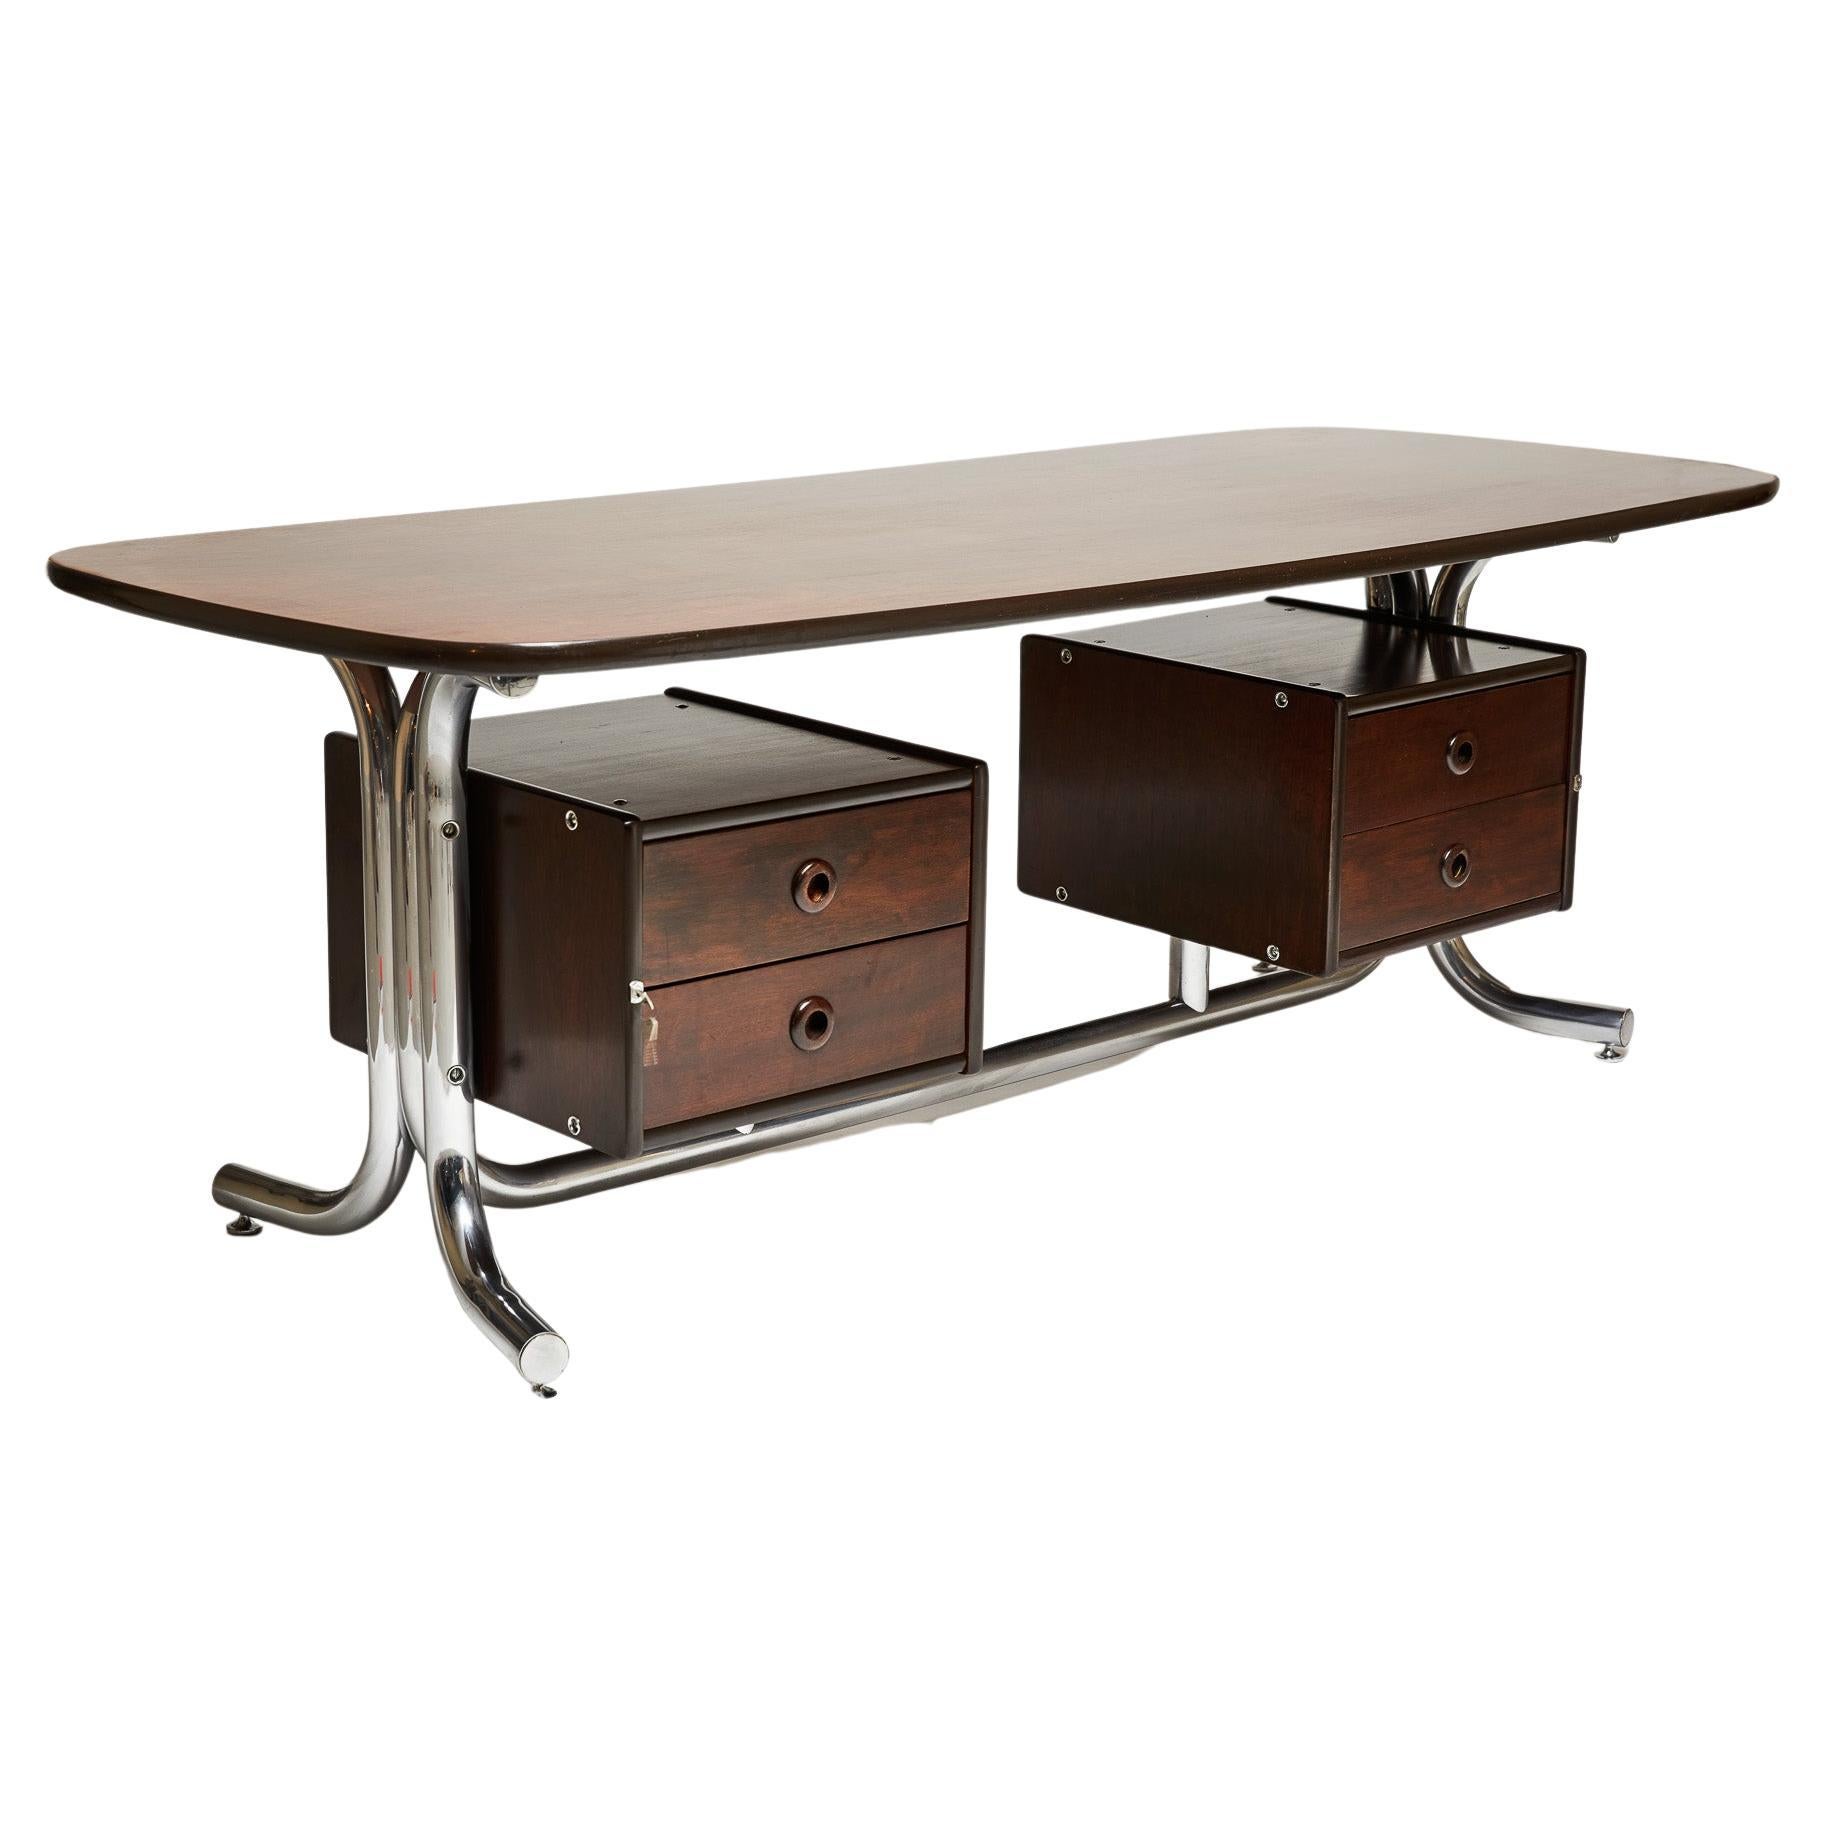 This Brazilian Modern desk has a chromed tubular metal base with top and drawers in agglomerated wood and Jacaranda (Brazilian rosewood) leaf. It has 4 floating drawers; keys are available. The wood has been refinished, the metal cleaned up and the